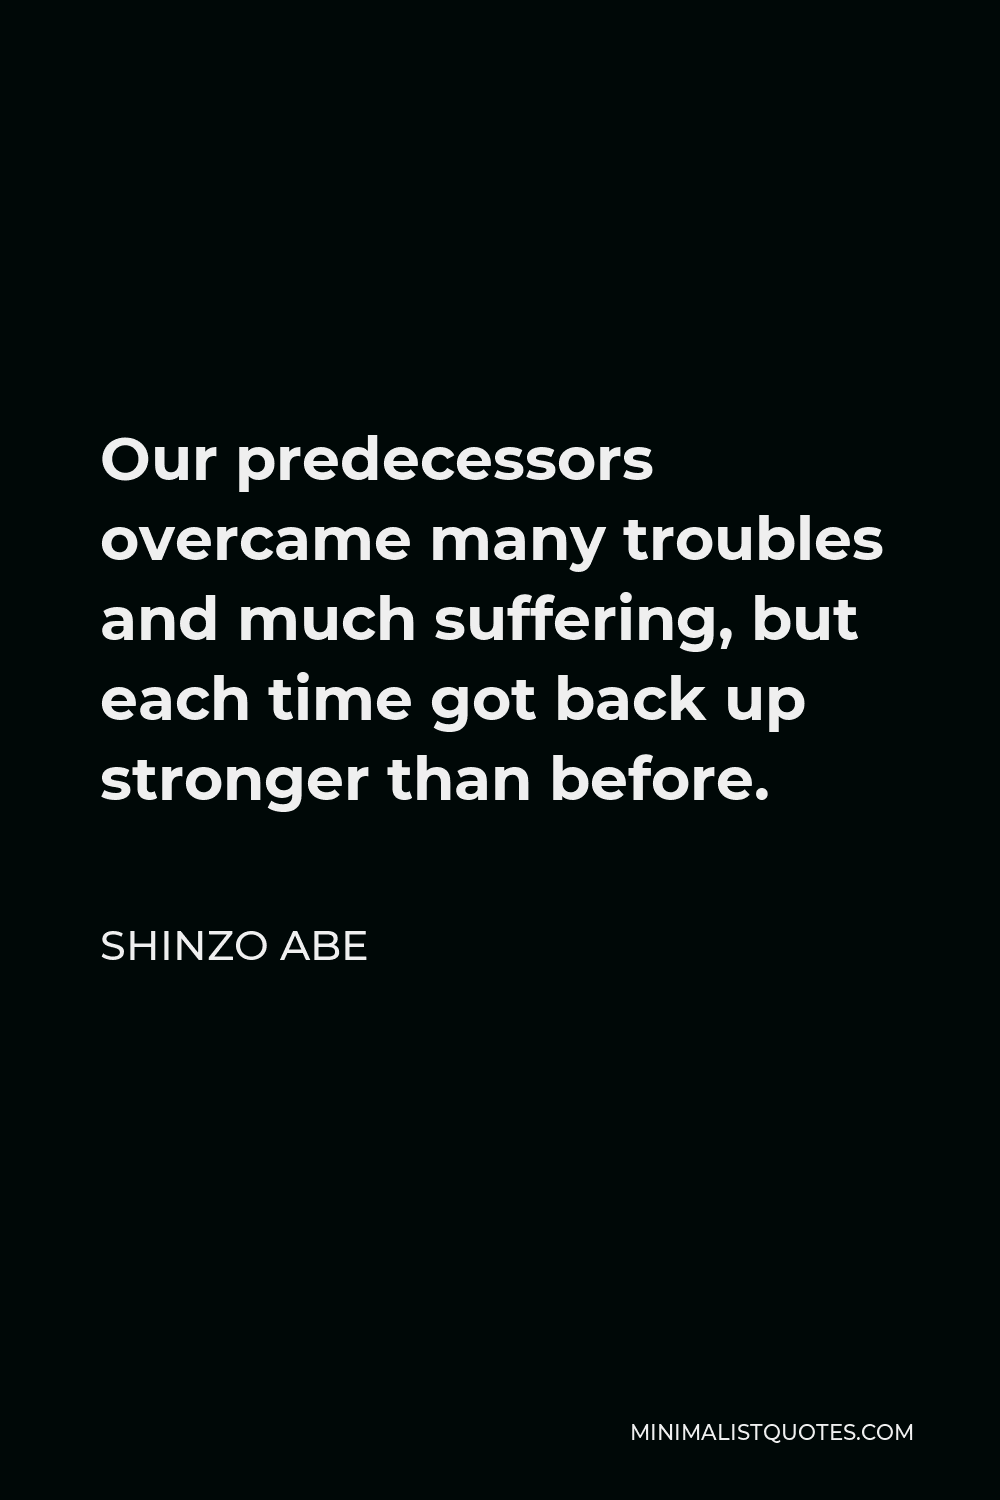 Shinzo Abe Quote - Our predecessors overcame many troubles and much suffering, but each time got back up stronger than before.